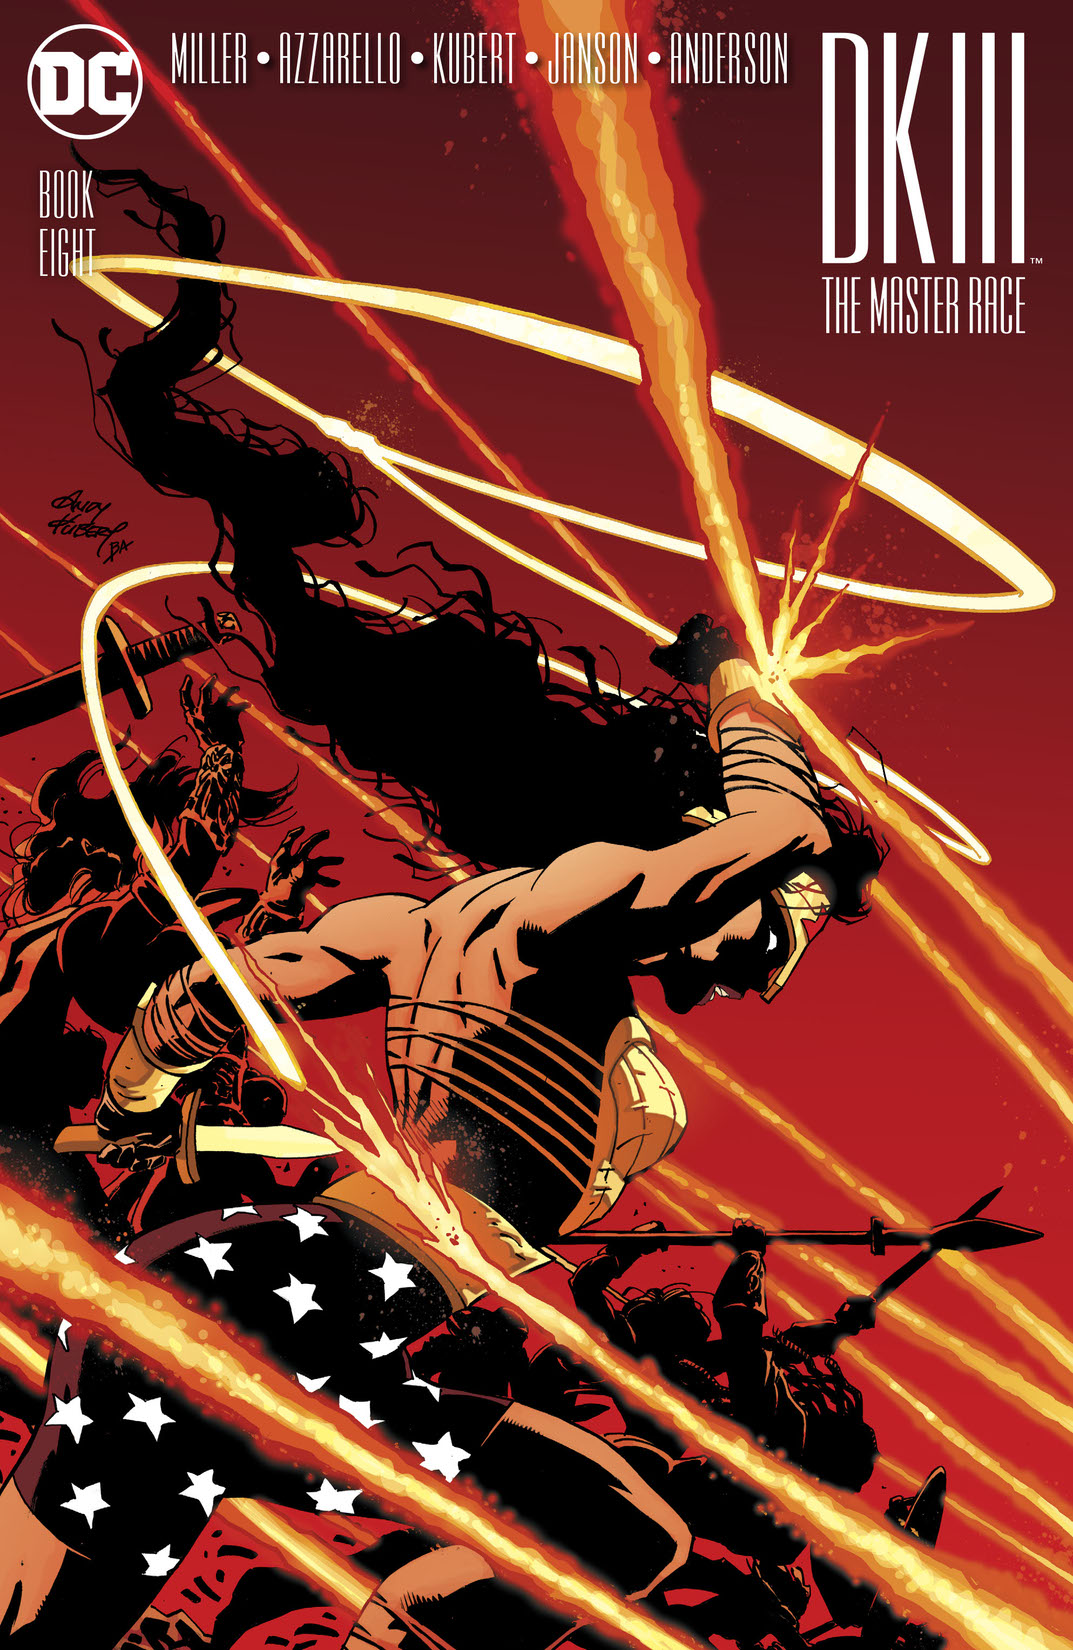 Dark Knight III: The Master Race #8 preview images